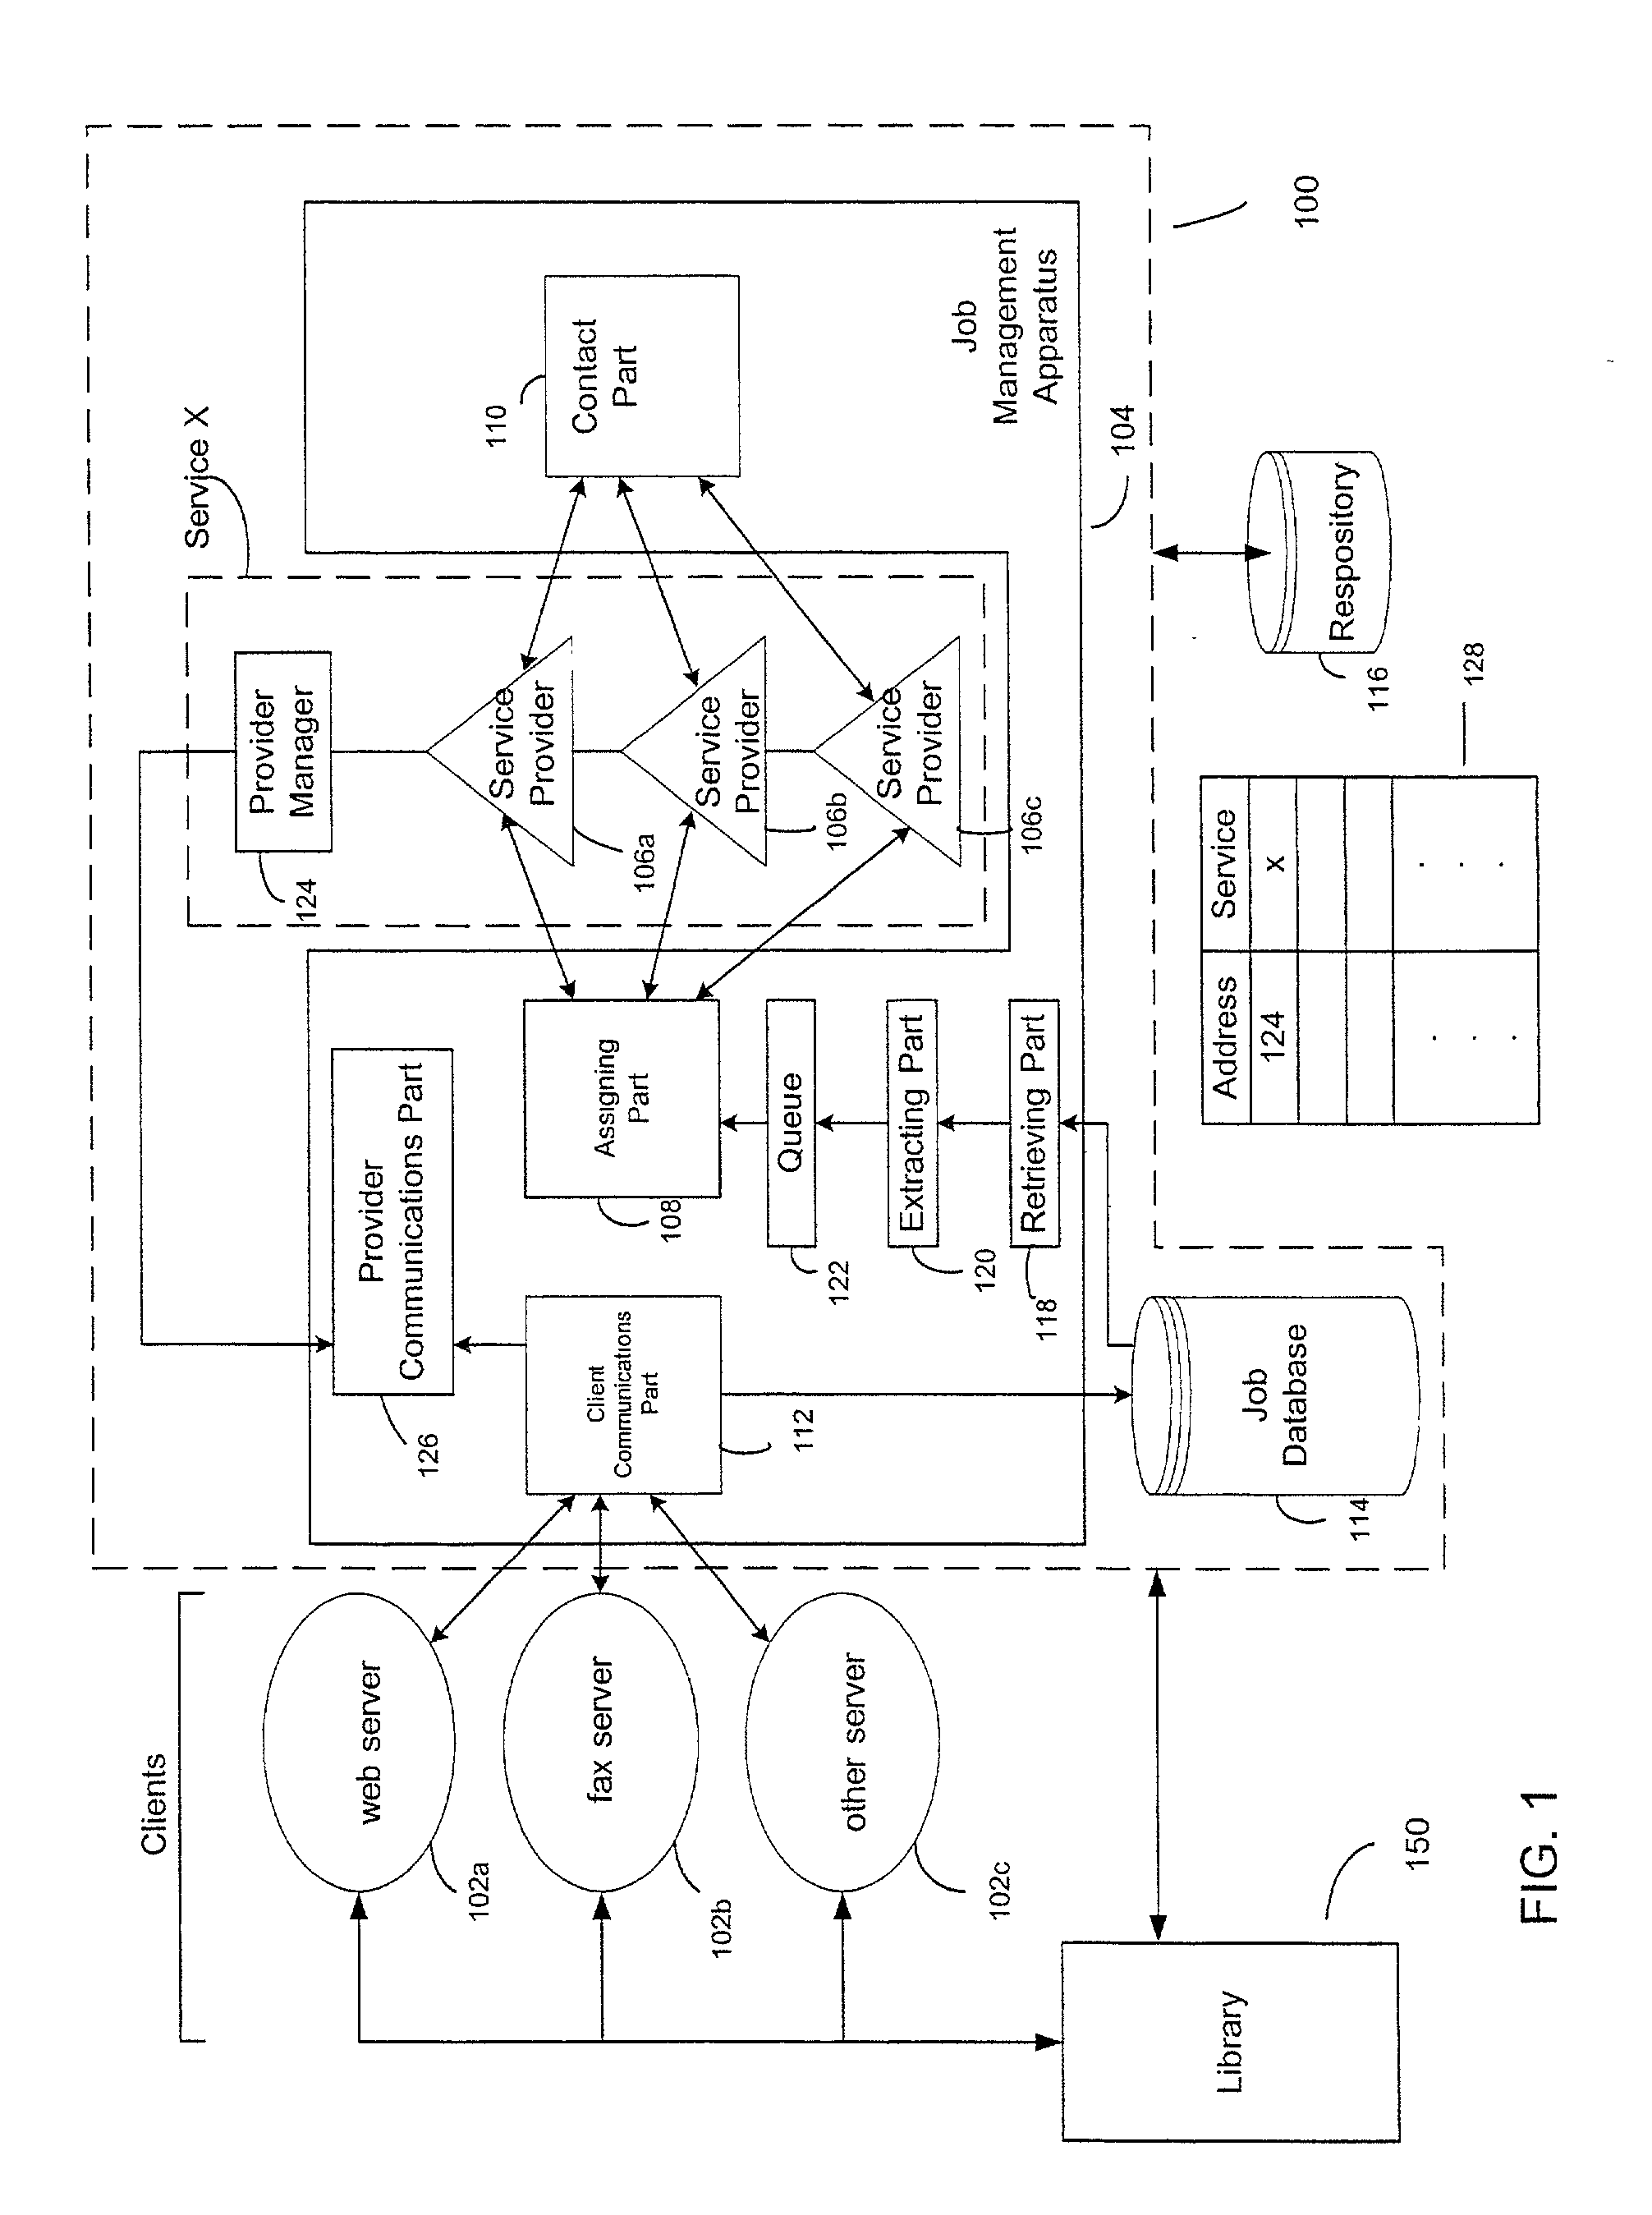 System for creating efficient multi-step document conversion services